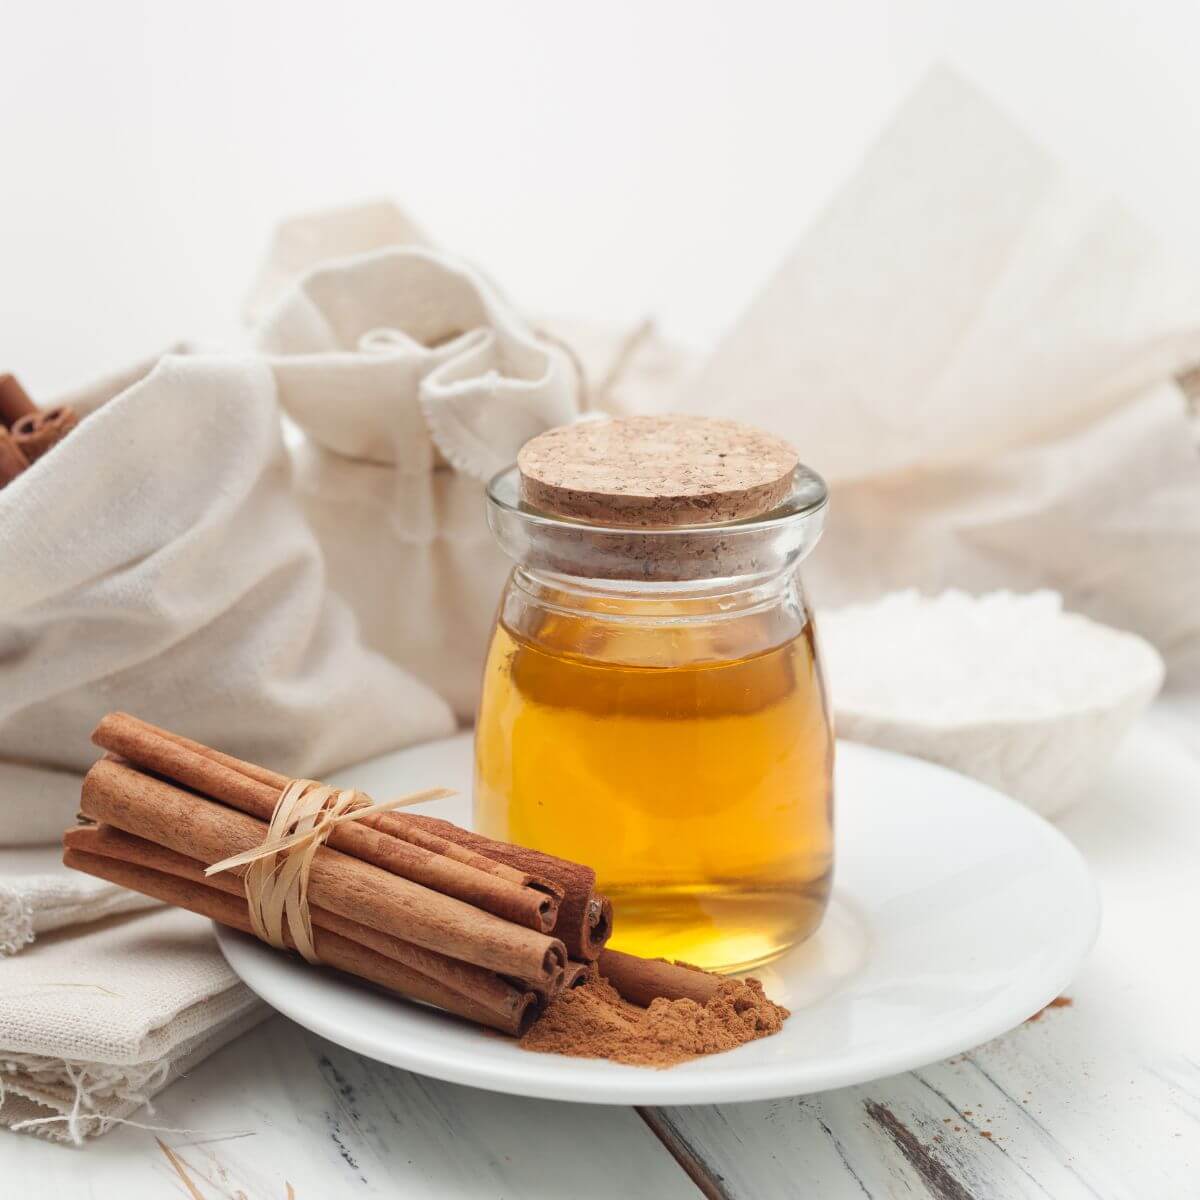 Try honey and cinnamon to quickly support your immune system.